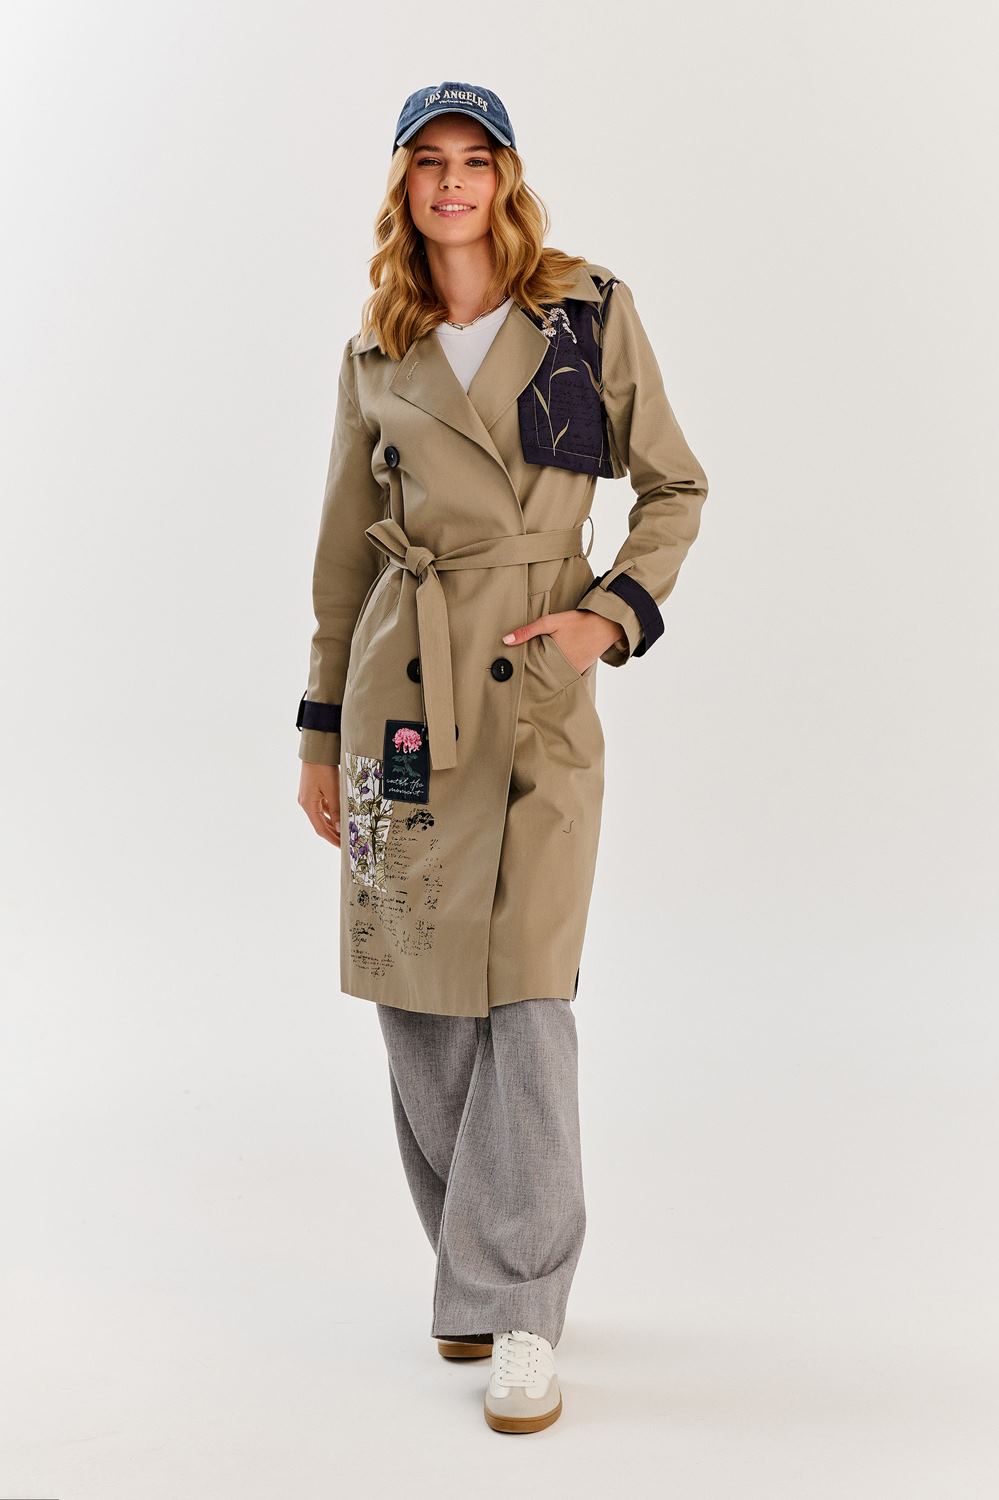 Blossom Trail classic trench